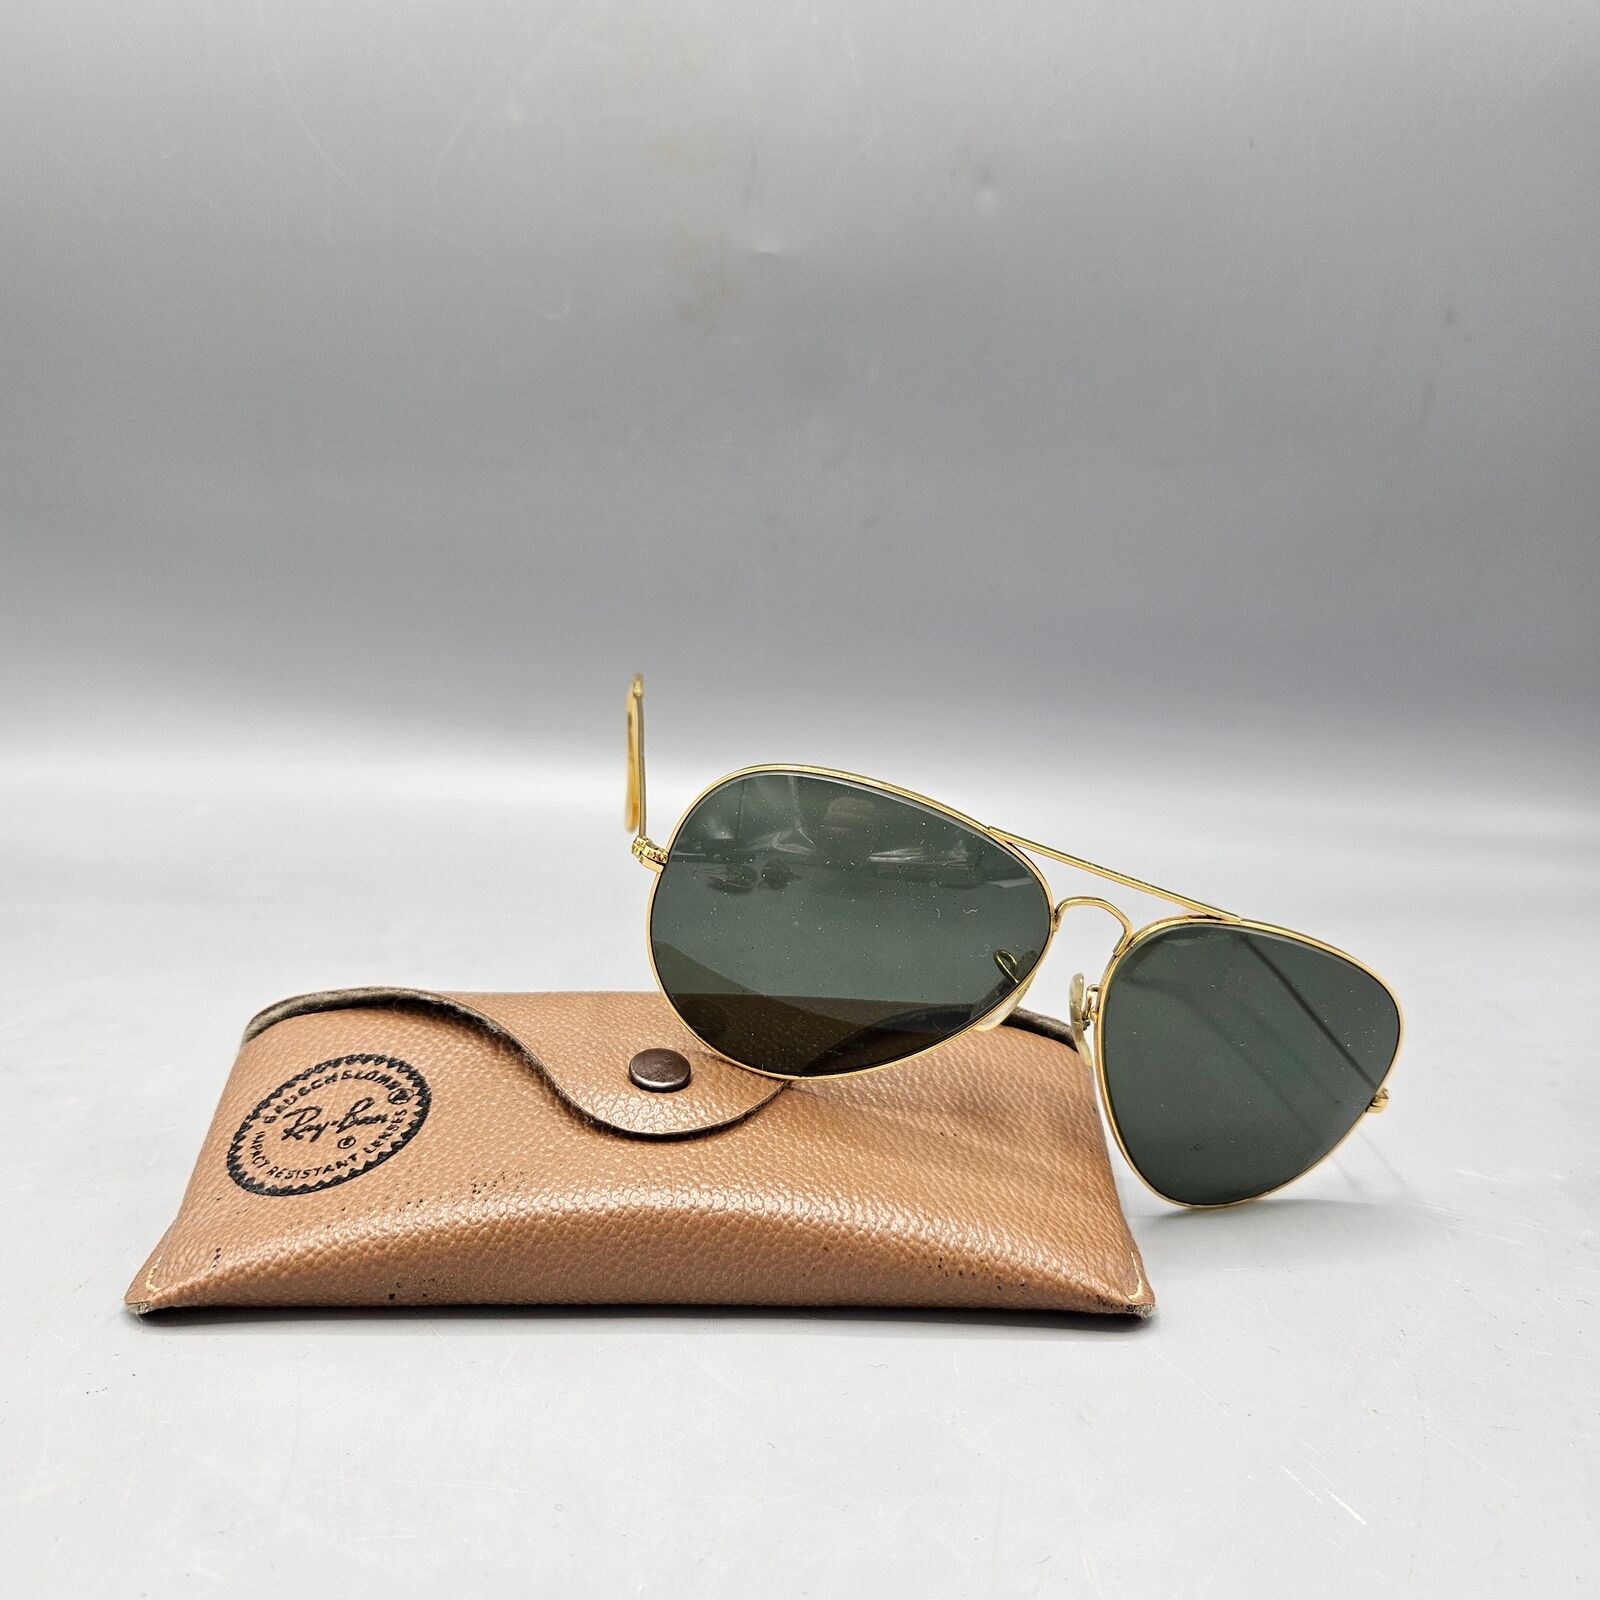 Vintage Ray Bans Aviator Sunglasses with Case